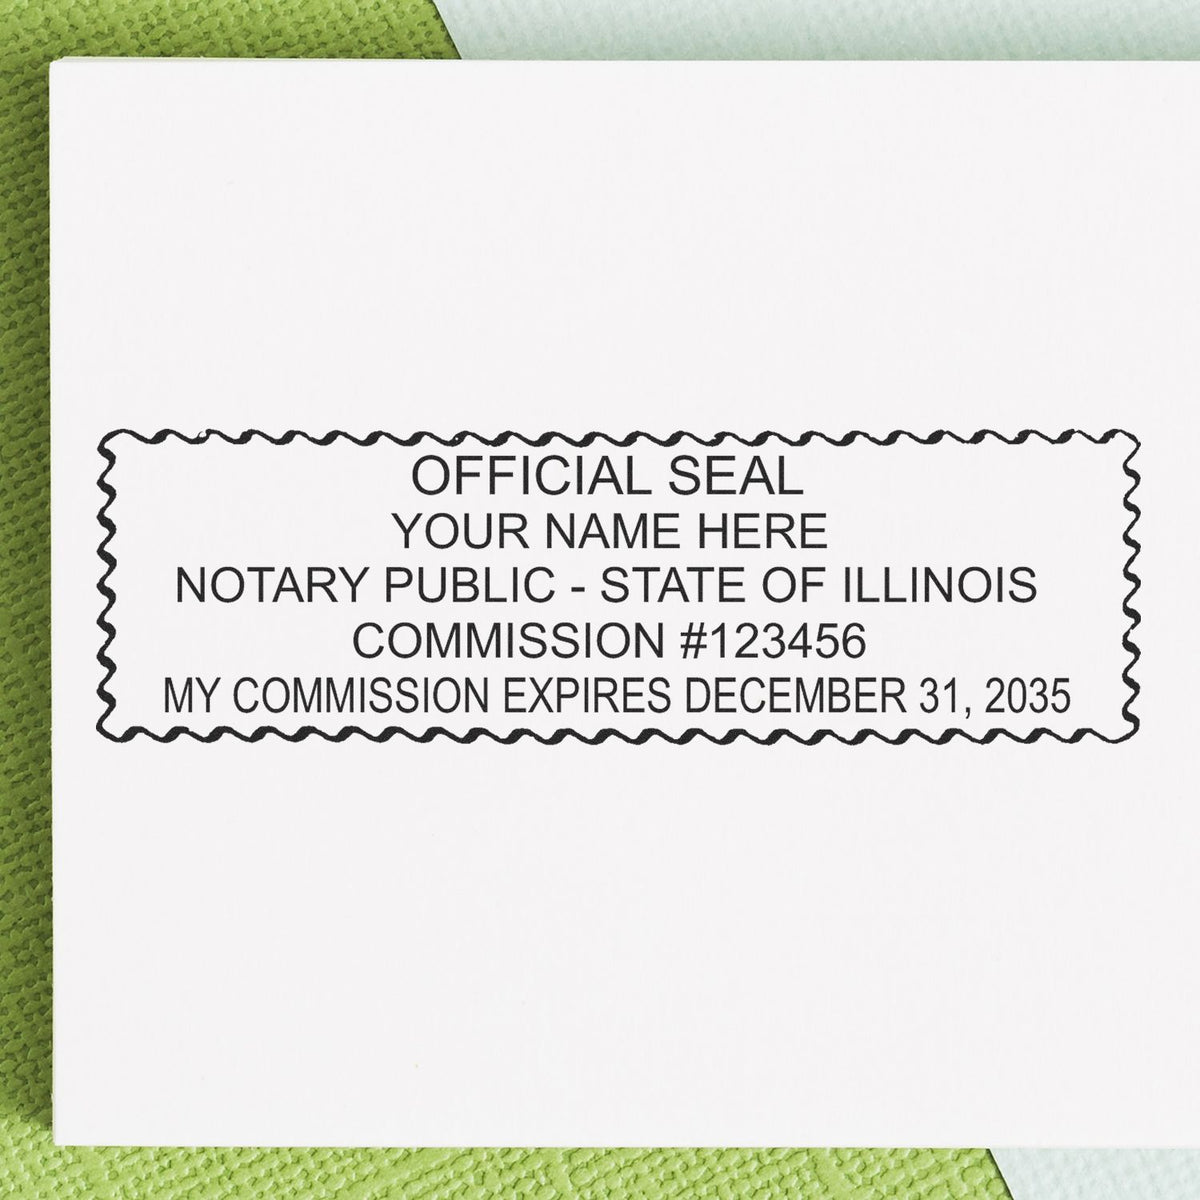 An alternative view of the Super Slim Illinois Notary Public Stamp stamped on a sheet of paper showing the image in use